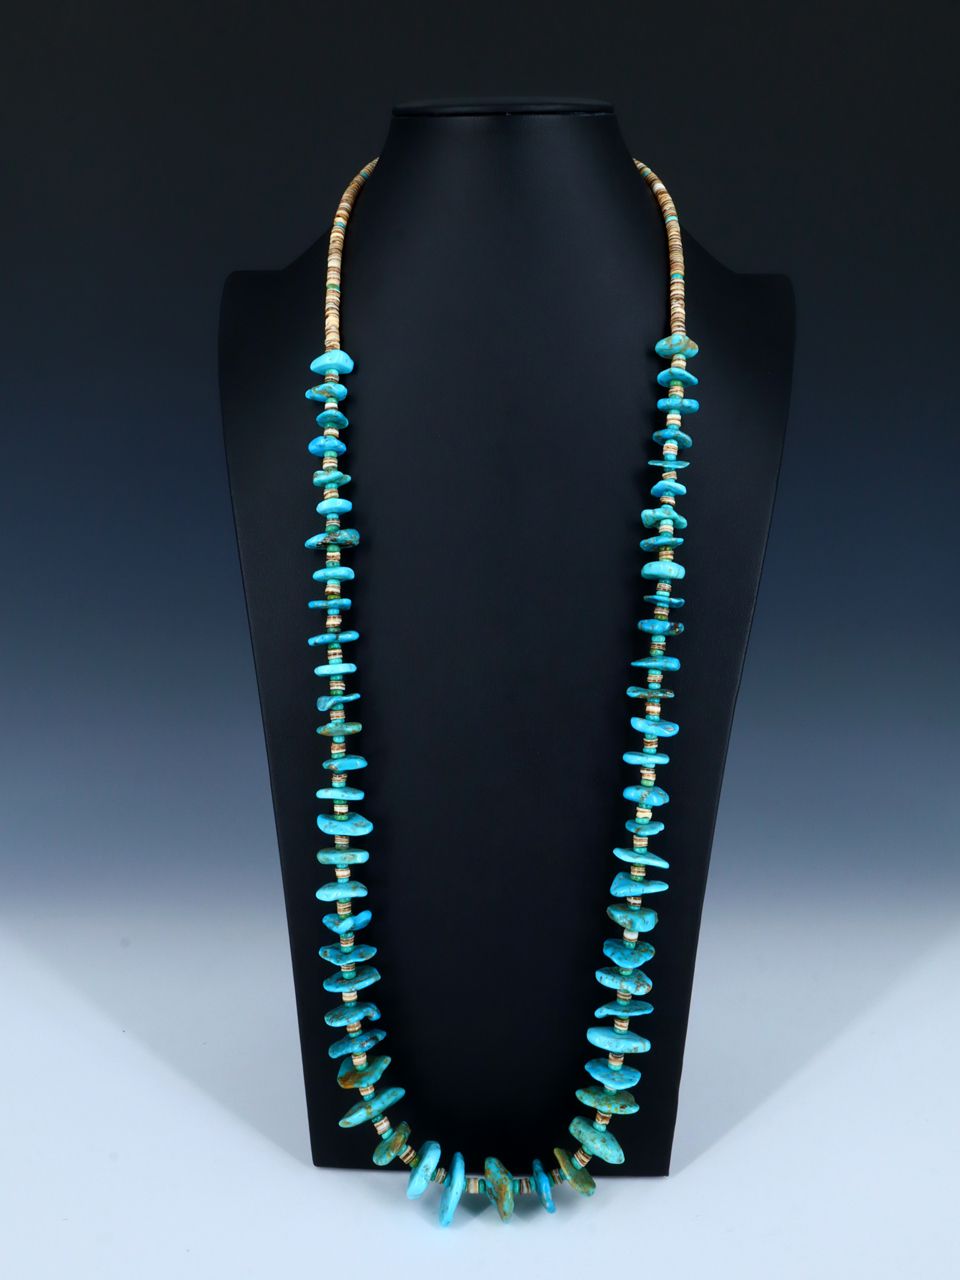 Lot 298: 2 Native American Turquoise Necklaces | Case Auctions